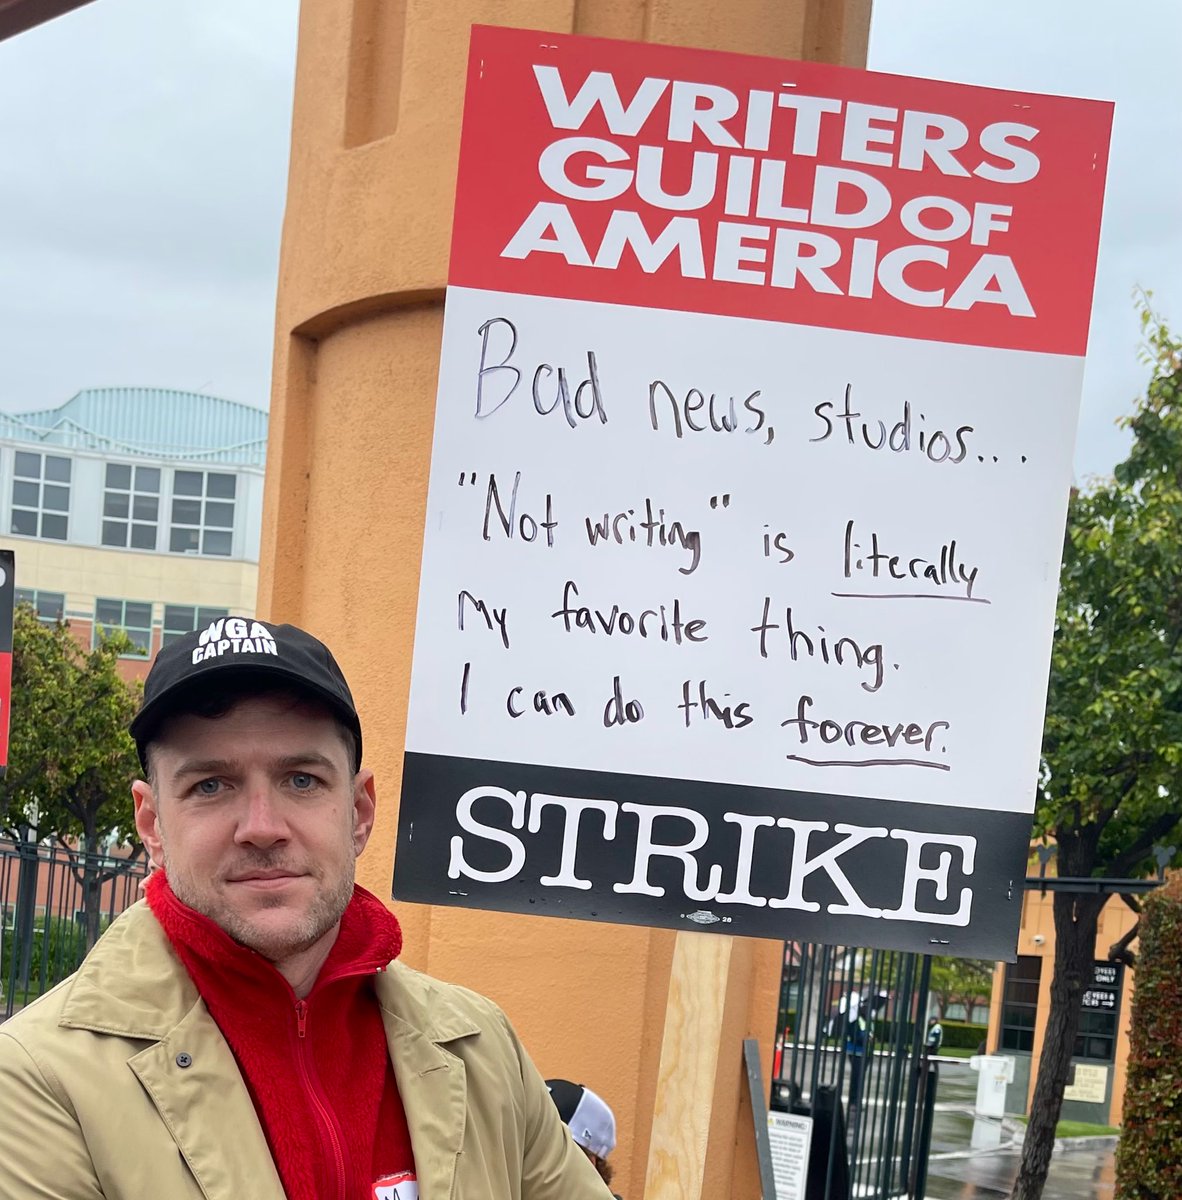 'BAD NEWS, STUDIOS...'NOT WRITING' IS *LITERALLY* MY FAVORITE THING. I CAN DO THIS *FOREVER*.' ✊🏽 @maxsilvestri #WritersStrike #WritersGuildofAmerica